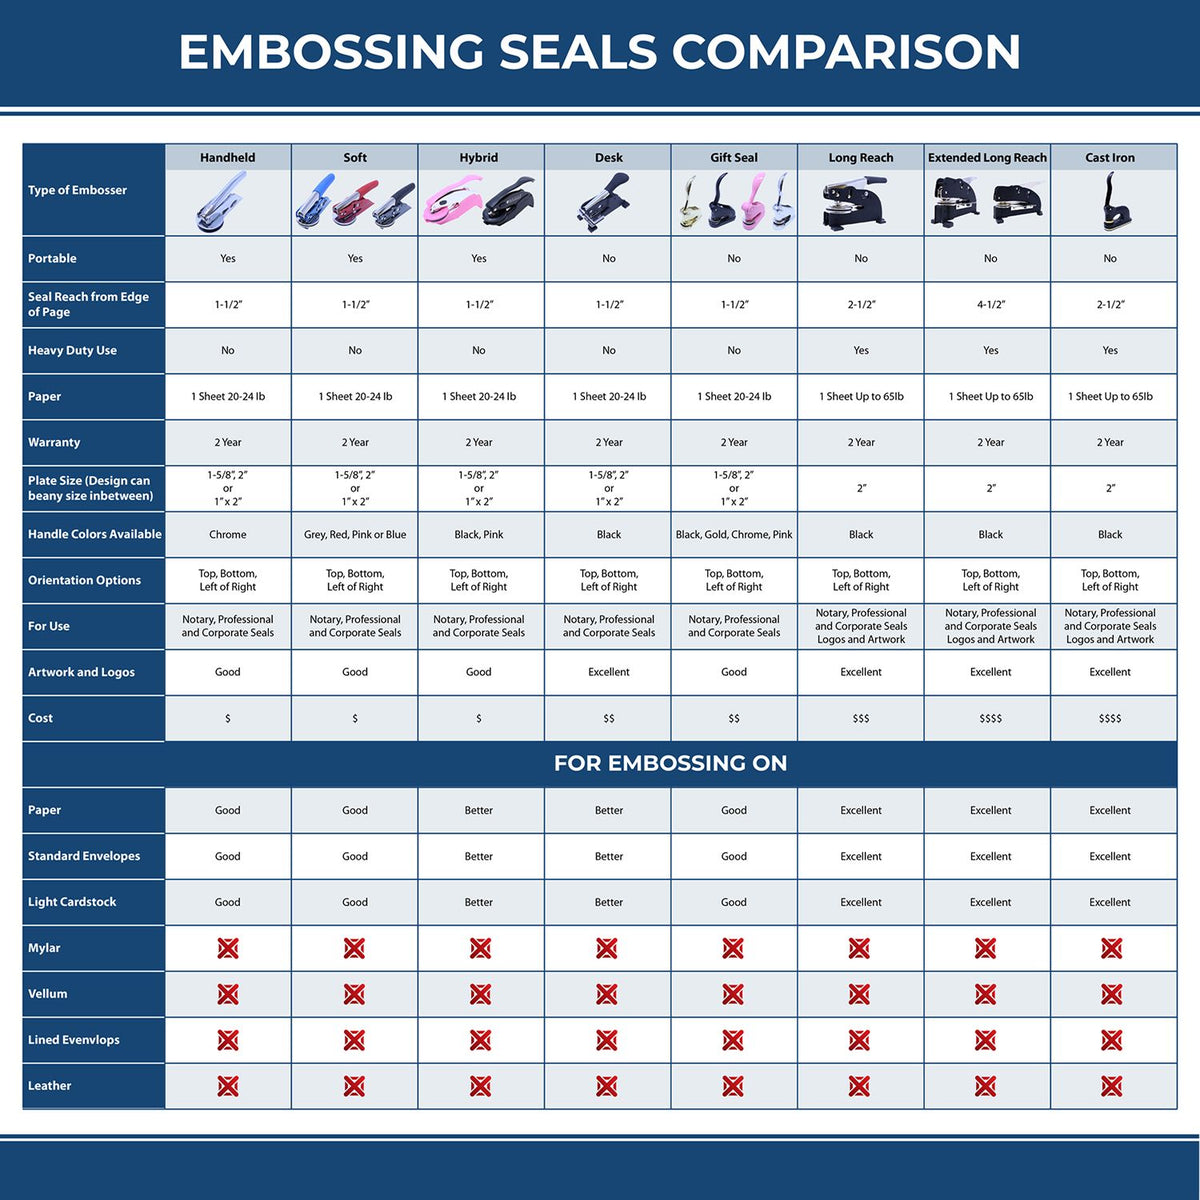 A comparison chart for the different types of mount models available for the Extended Long Reach Maine Architect Seal Embosser.